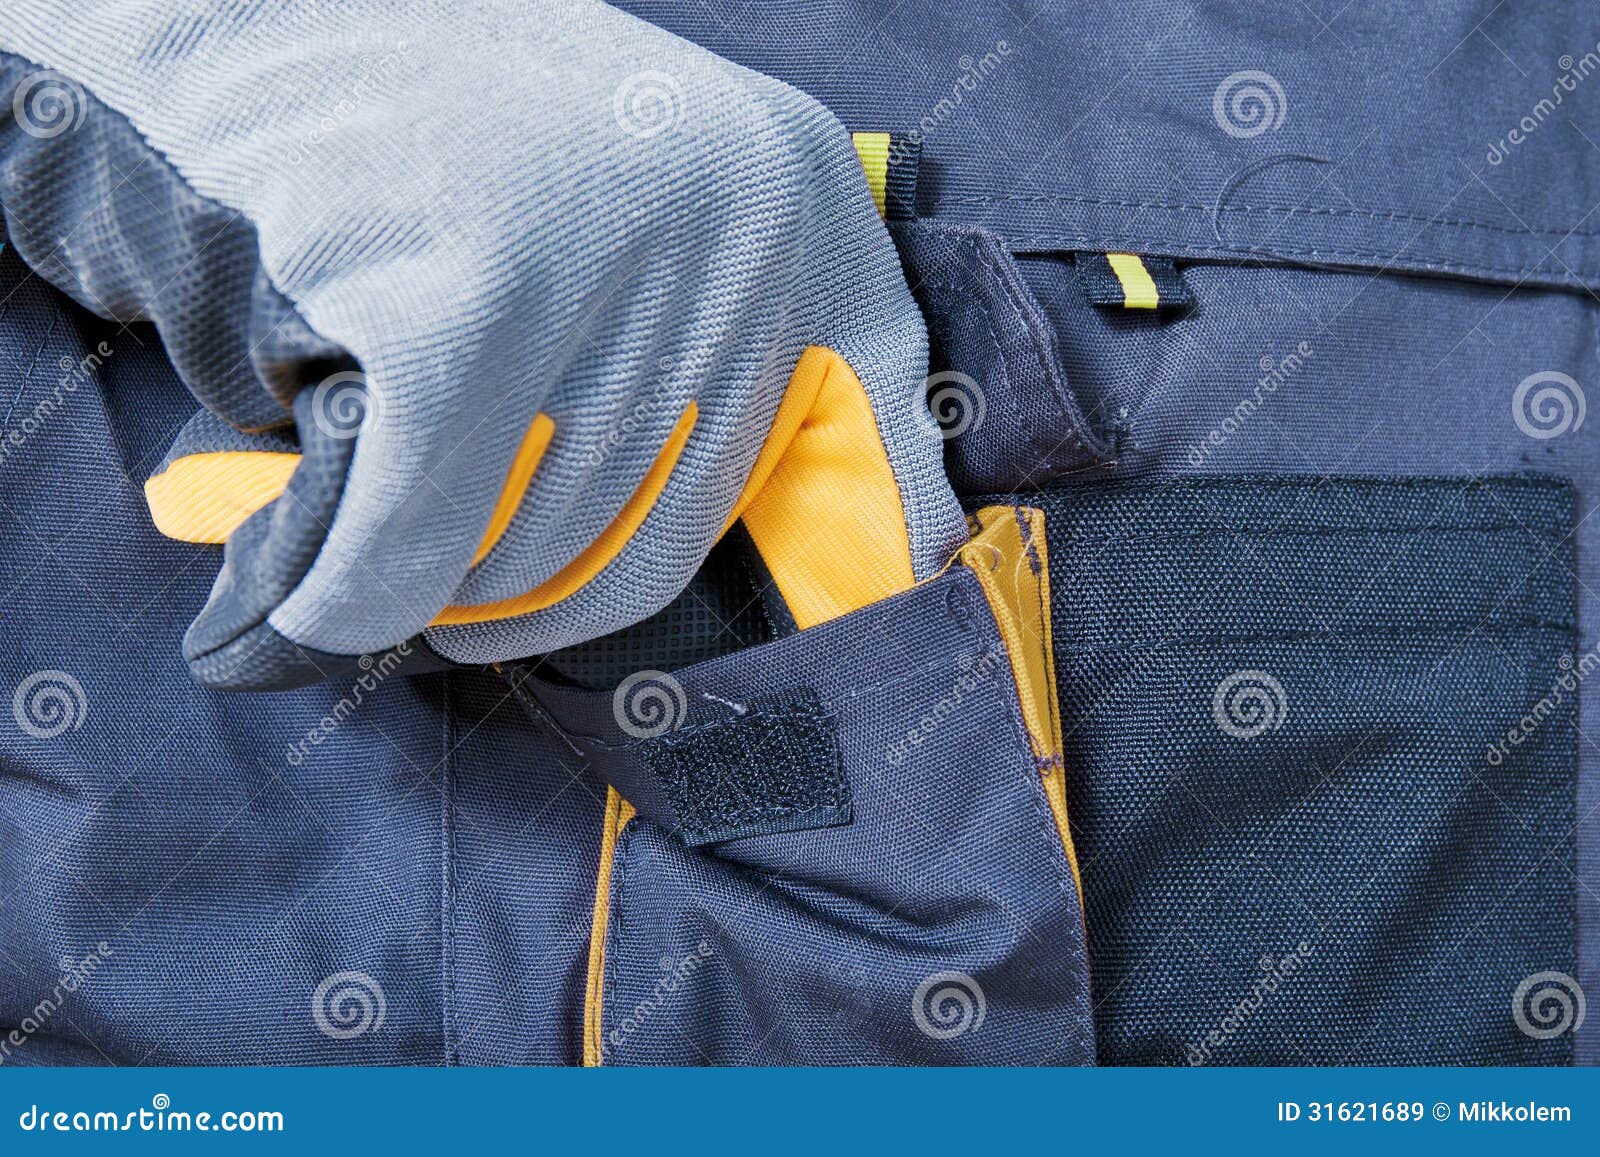 Working overalls stock image. Image of electrician, background - 31621689